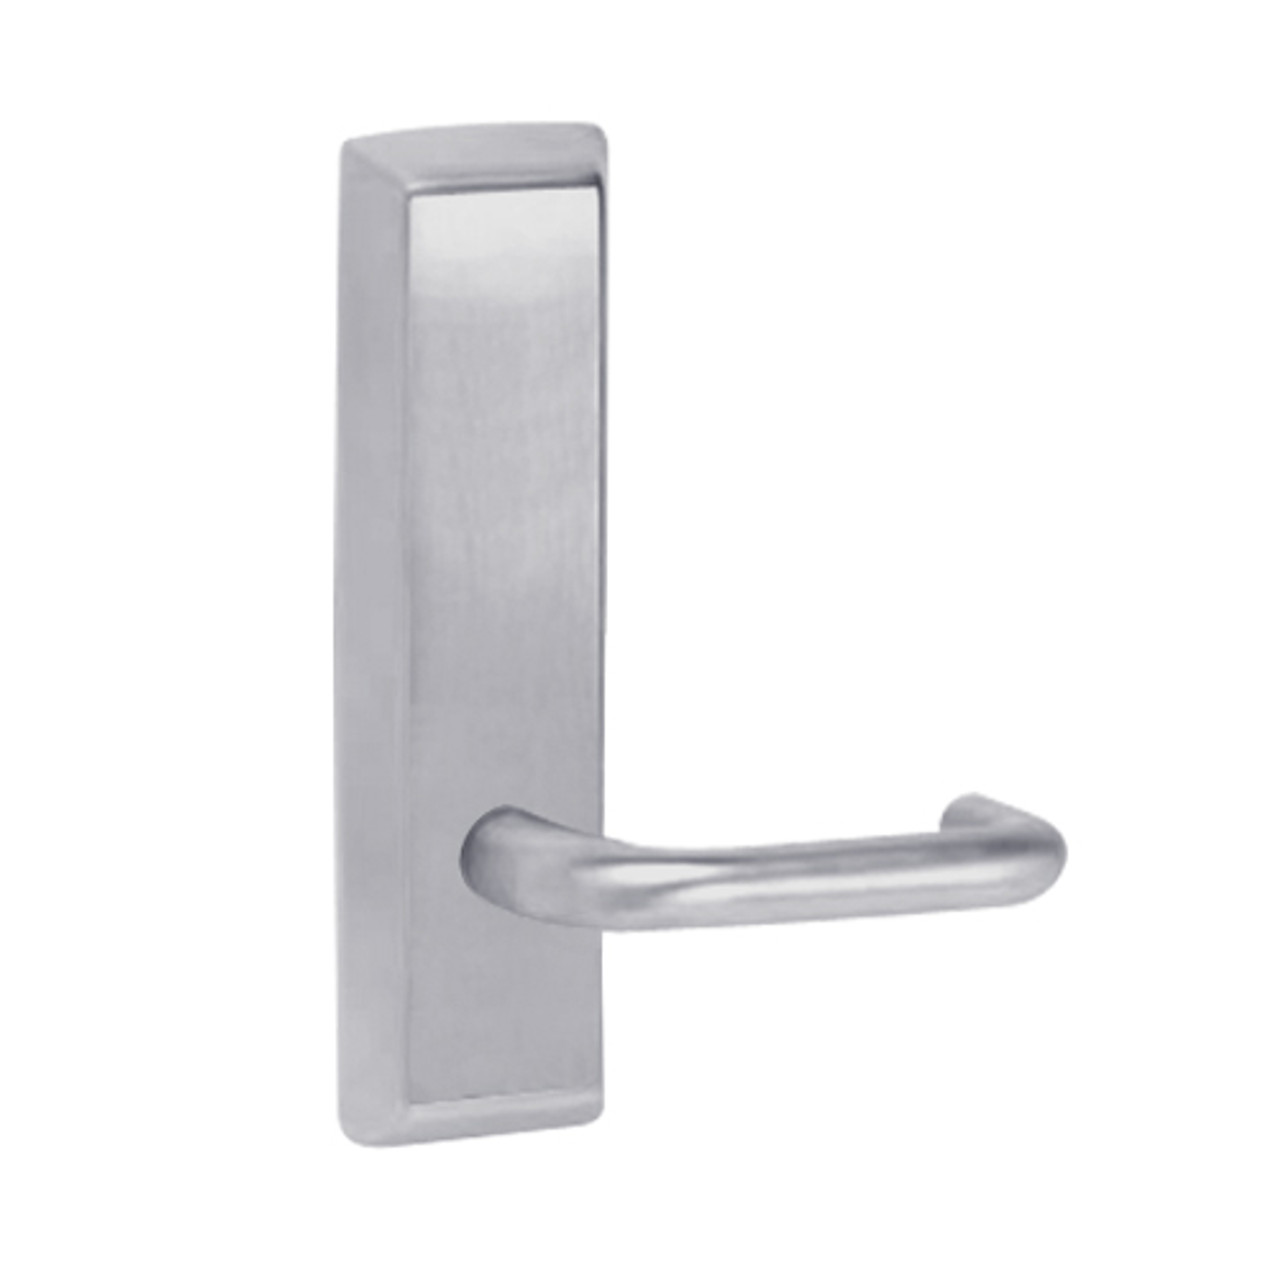 L955-626-RHR Corbin ED5000 Series Exit Device Trim with Classroom Lustra Lever in Satin Chrome Finish